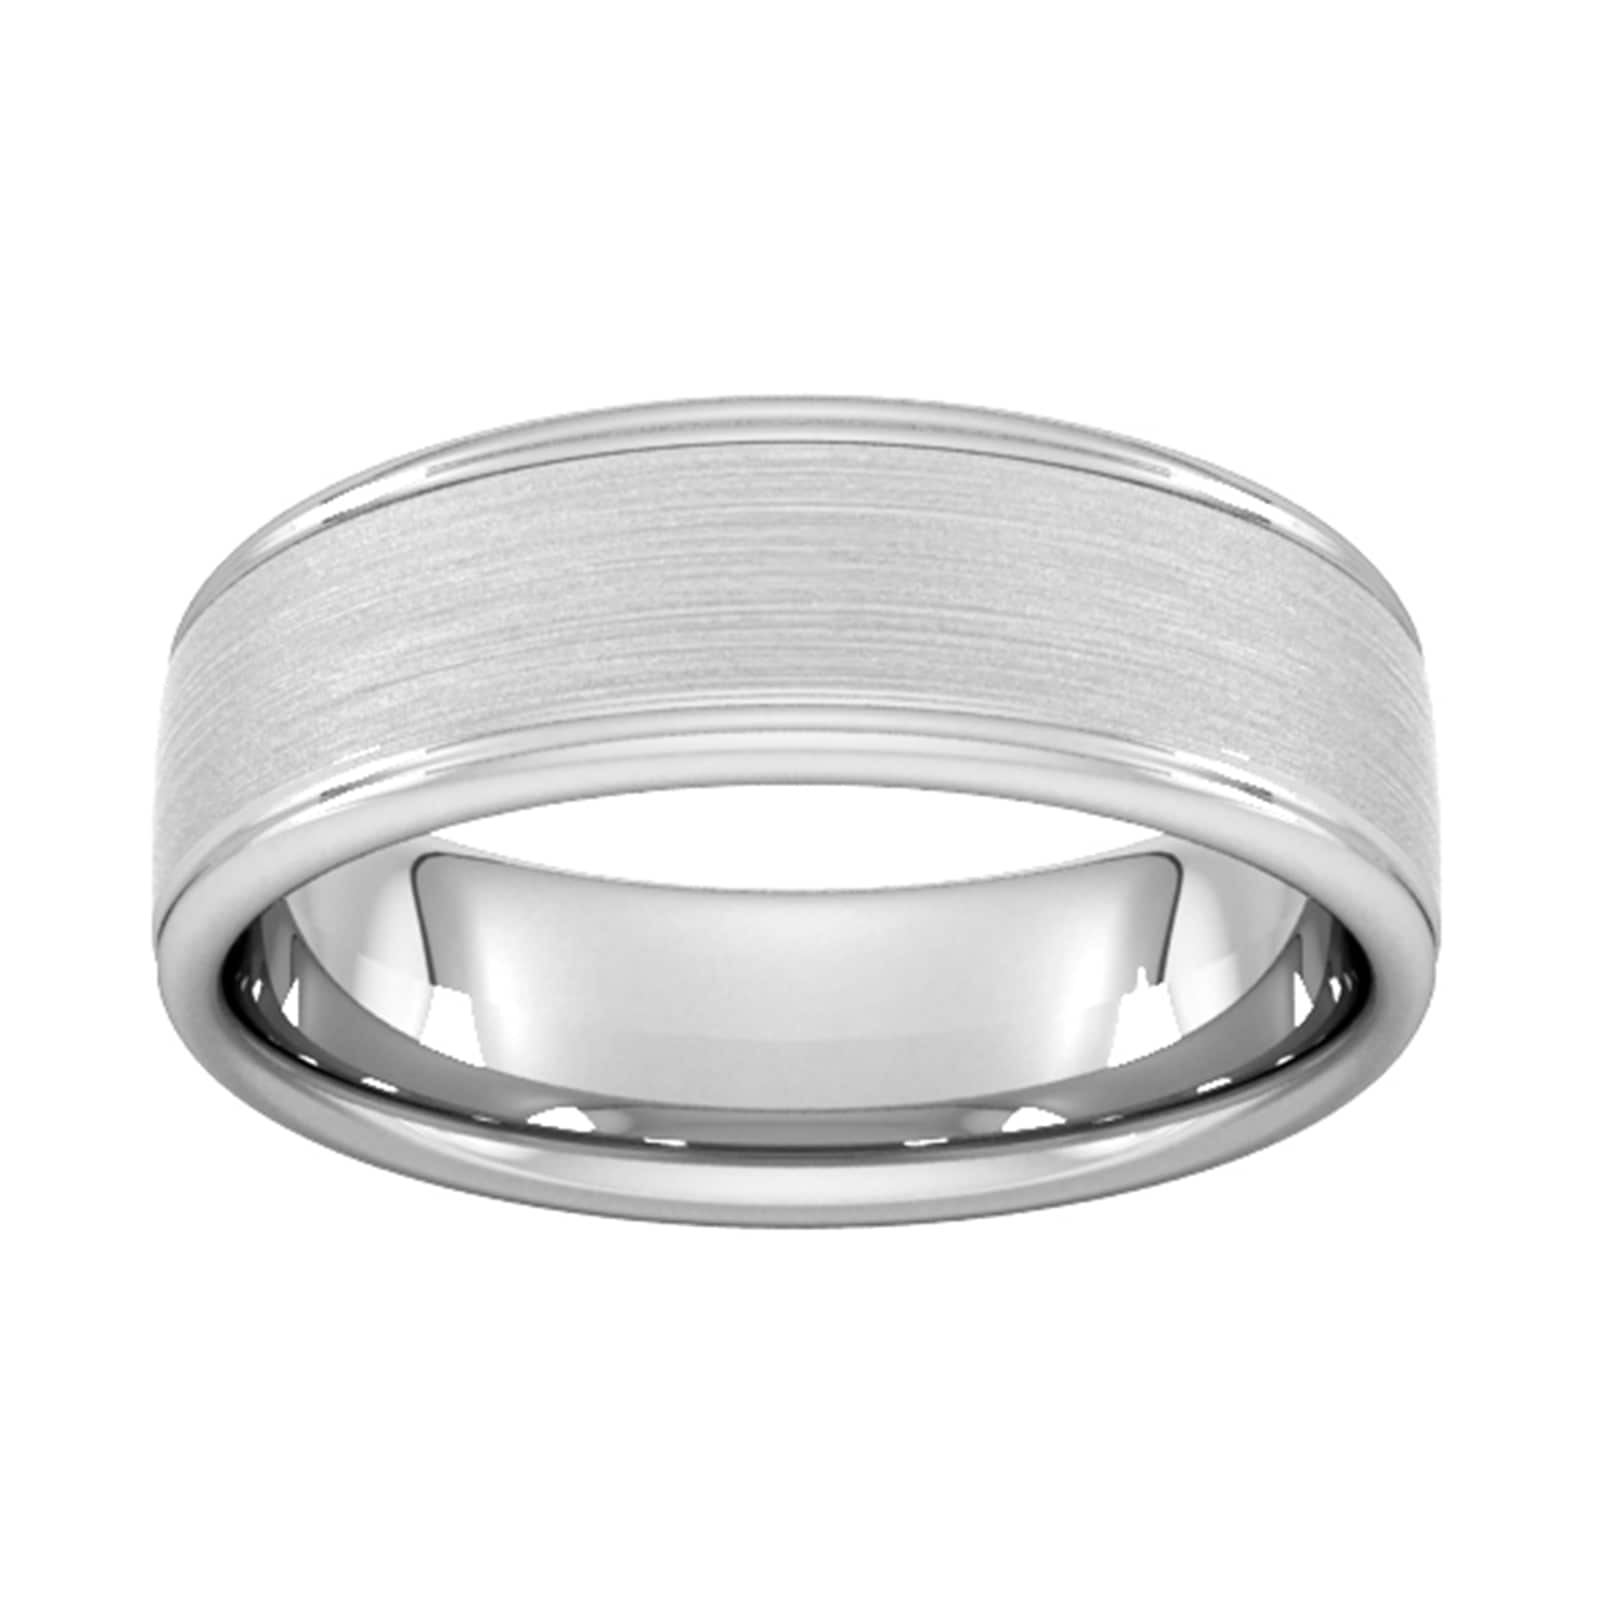 7mm Slight Court Extra Heavy Matt Centre With Grooves Wedding Ring In 18 Carat White Gold - Ring Size H